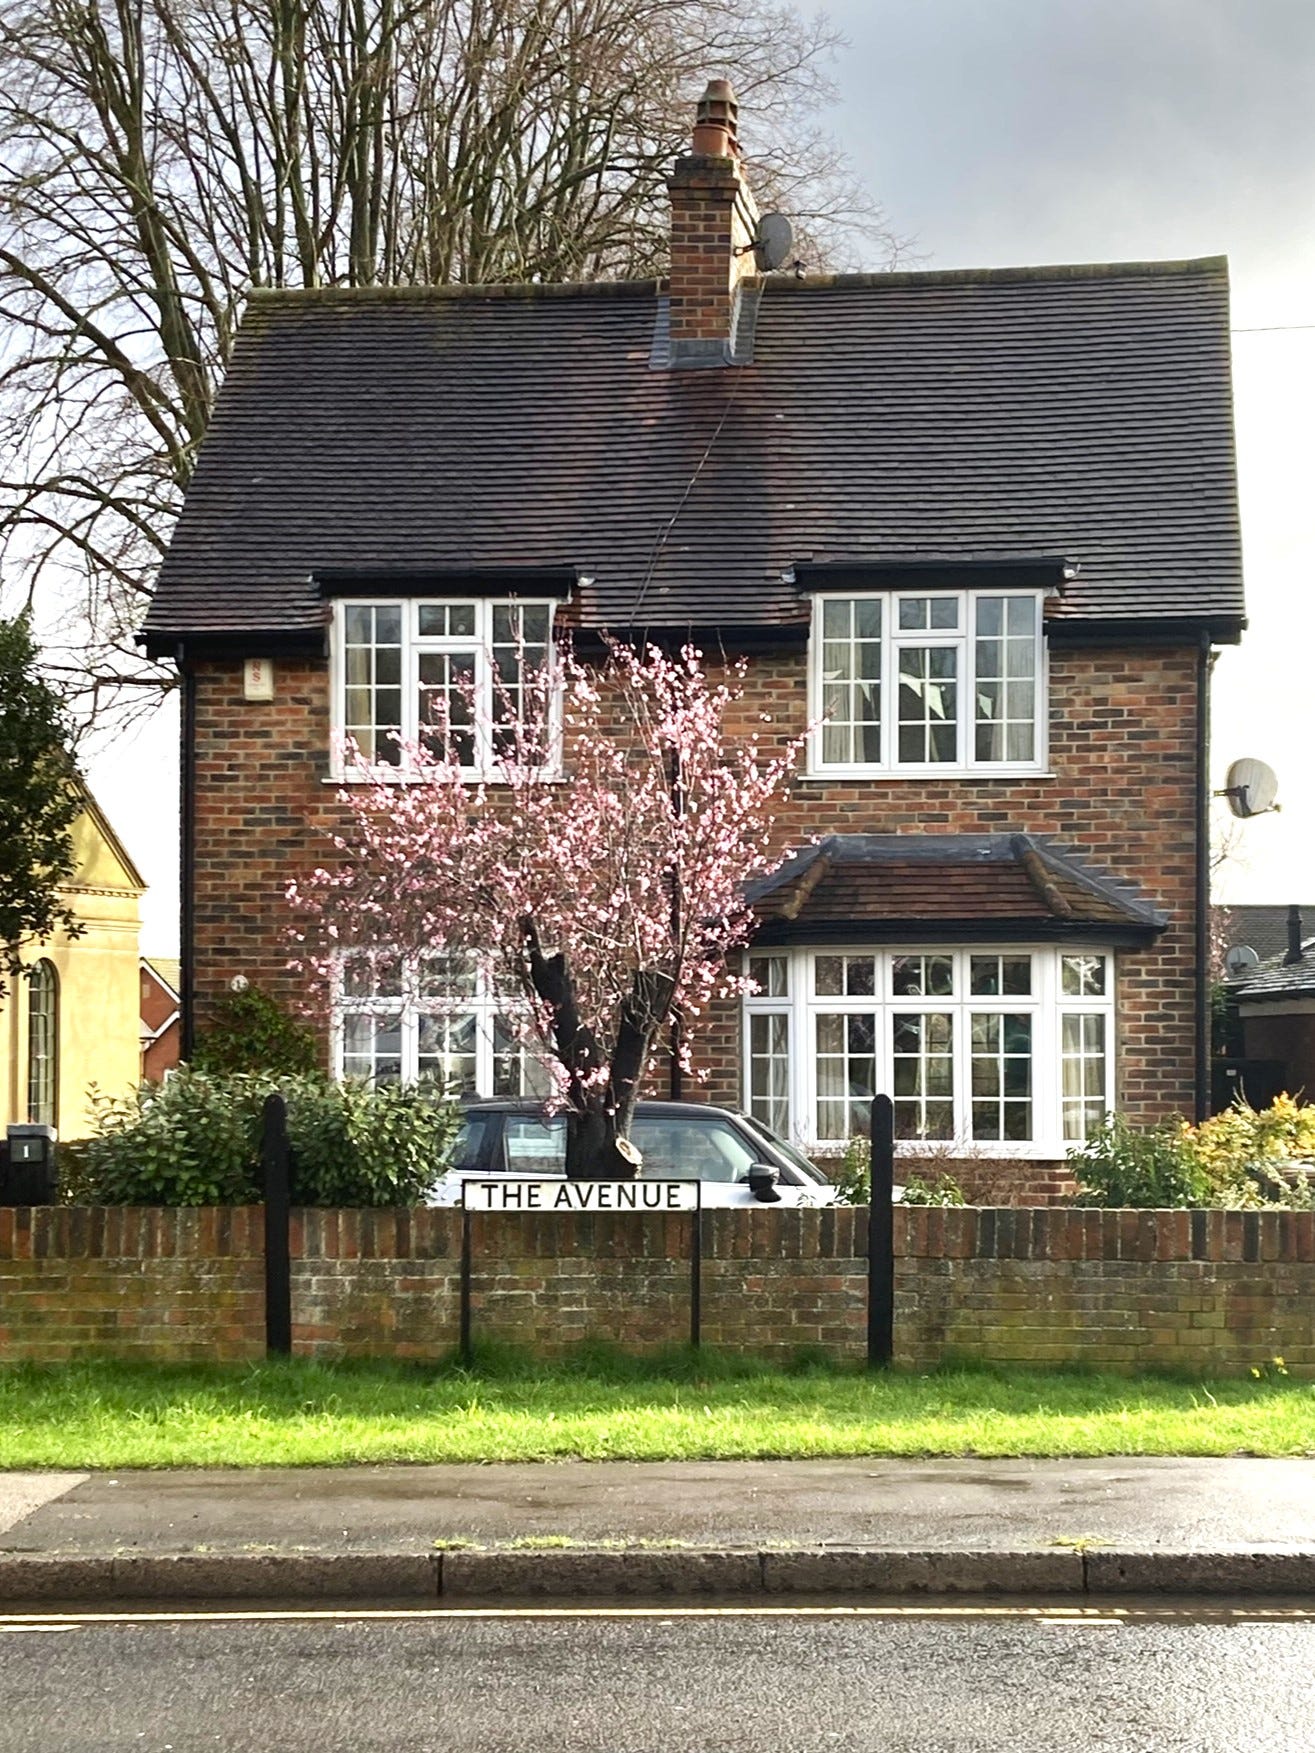 A brick house outside a grey-blue sky. In front of the house is a tree covered in pink blossom.